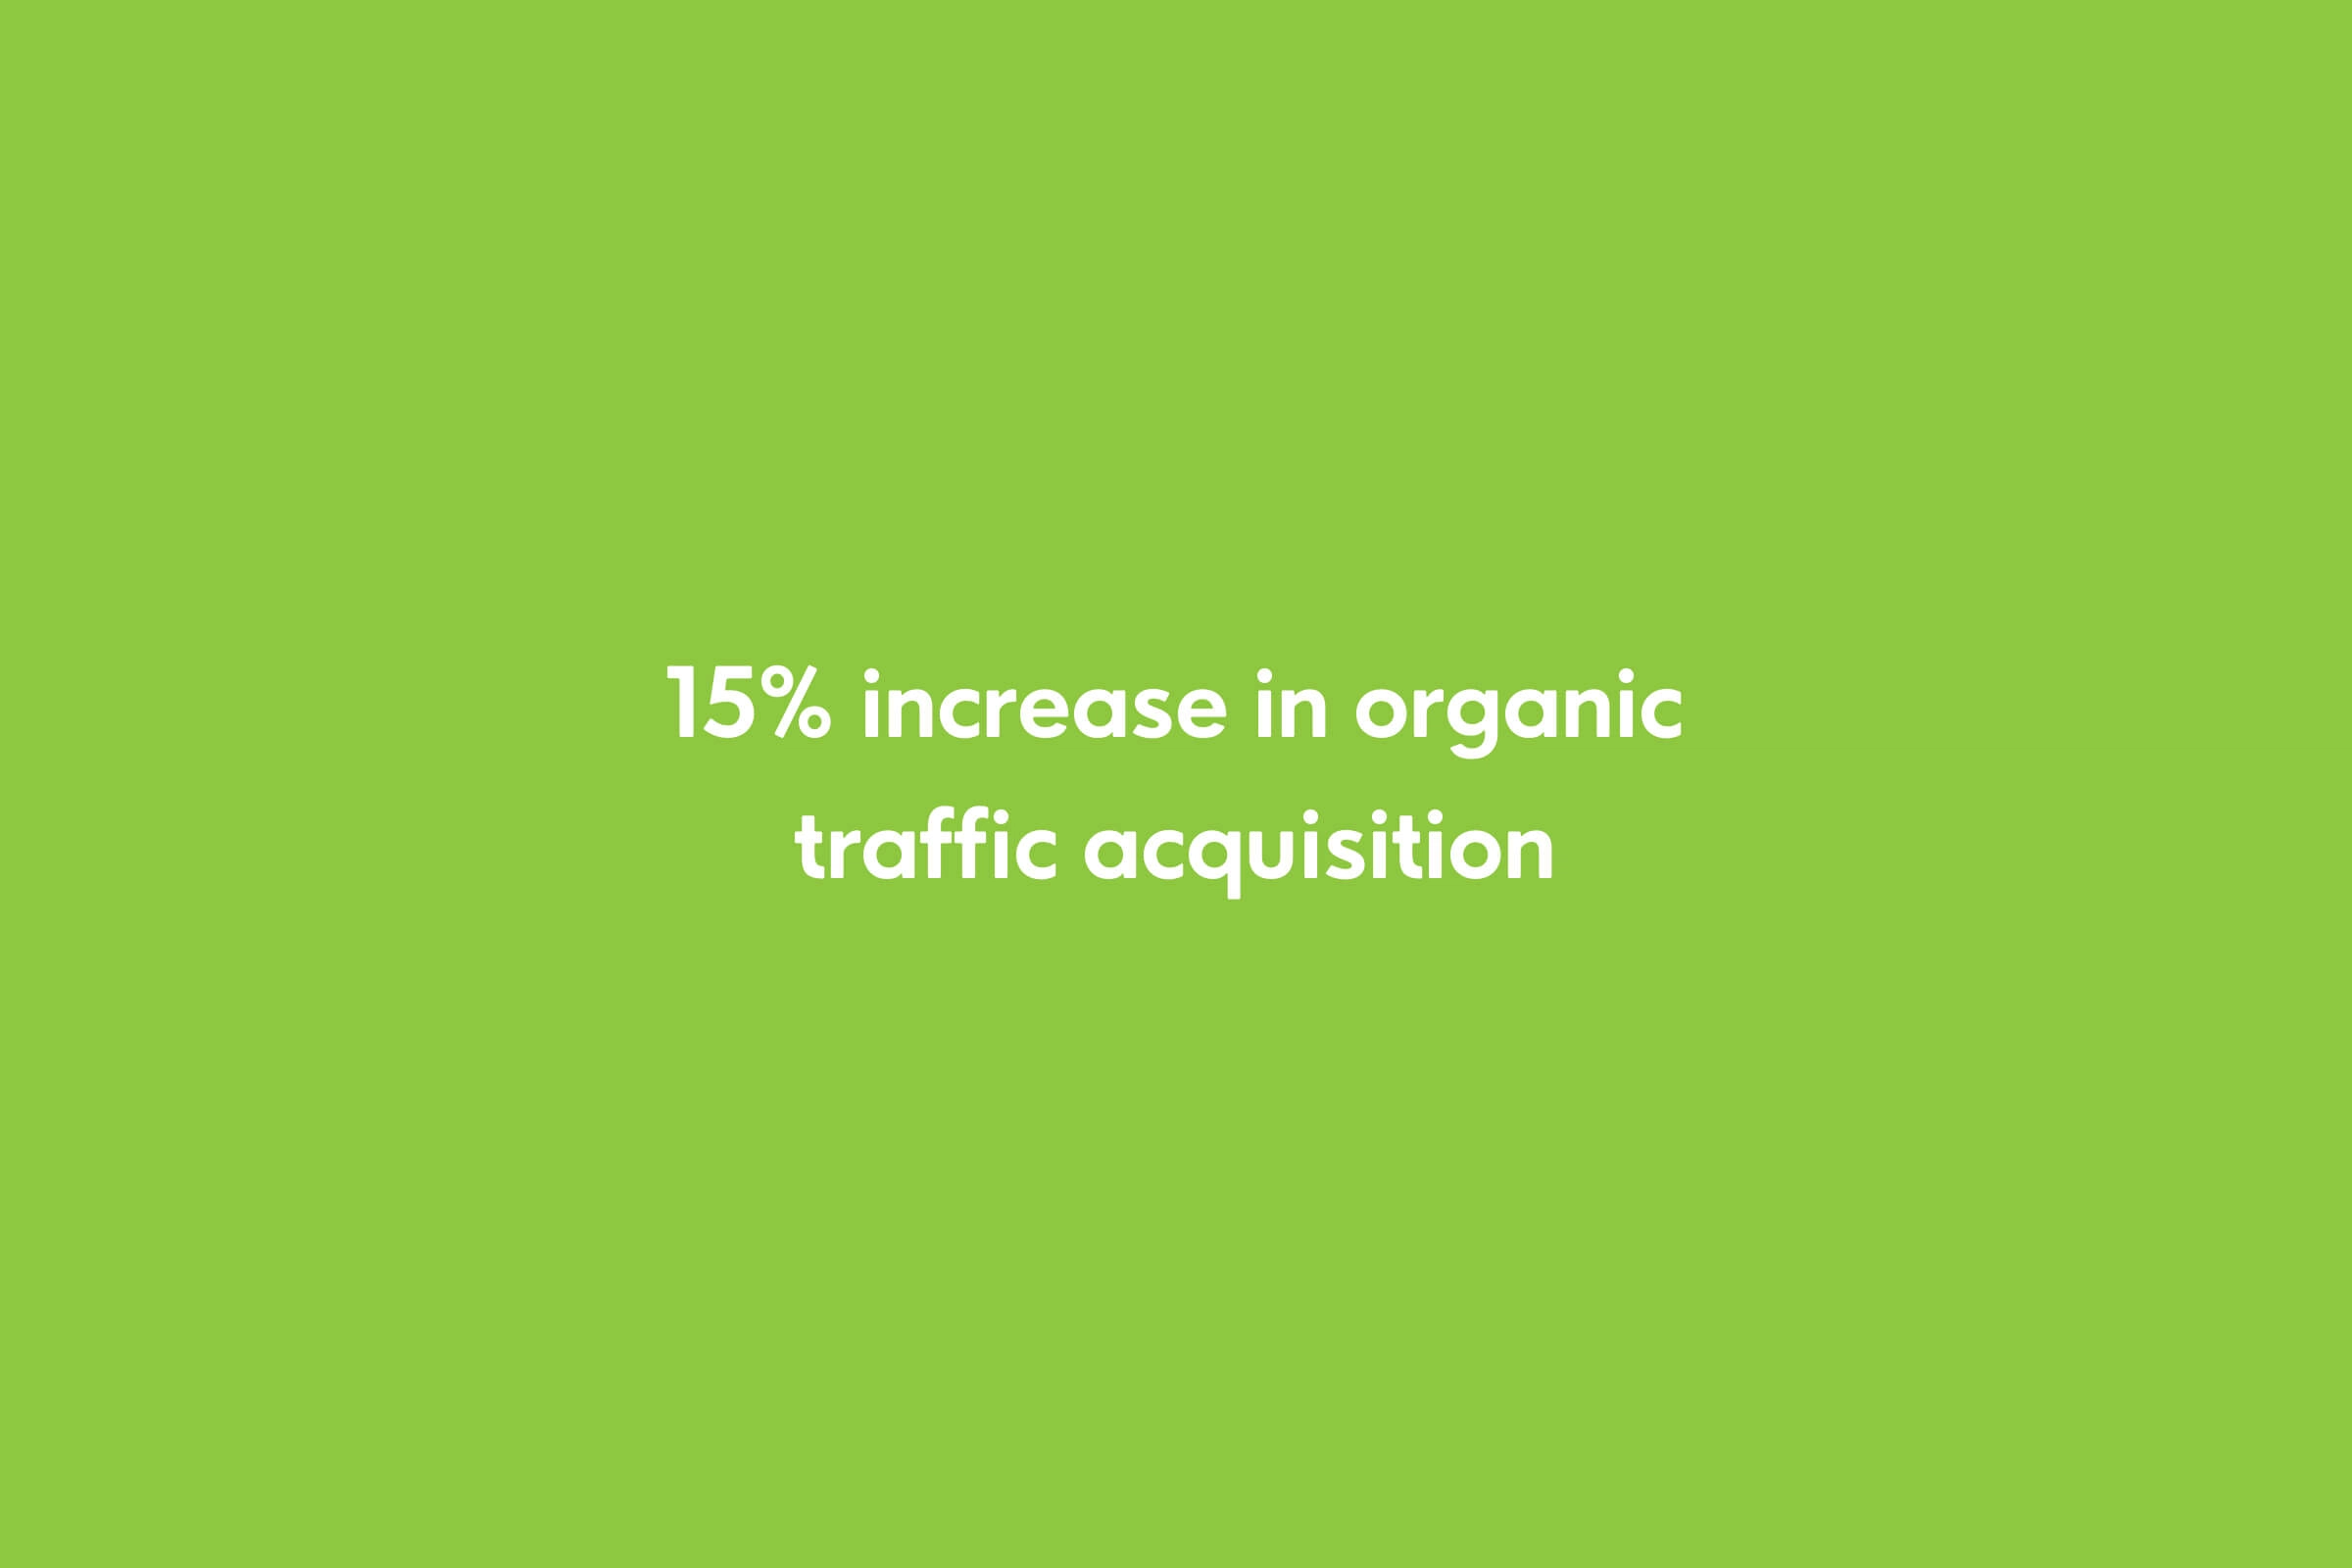 15% increase in organic traffic acquisition